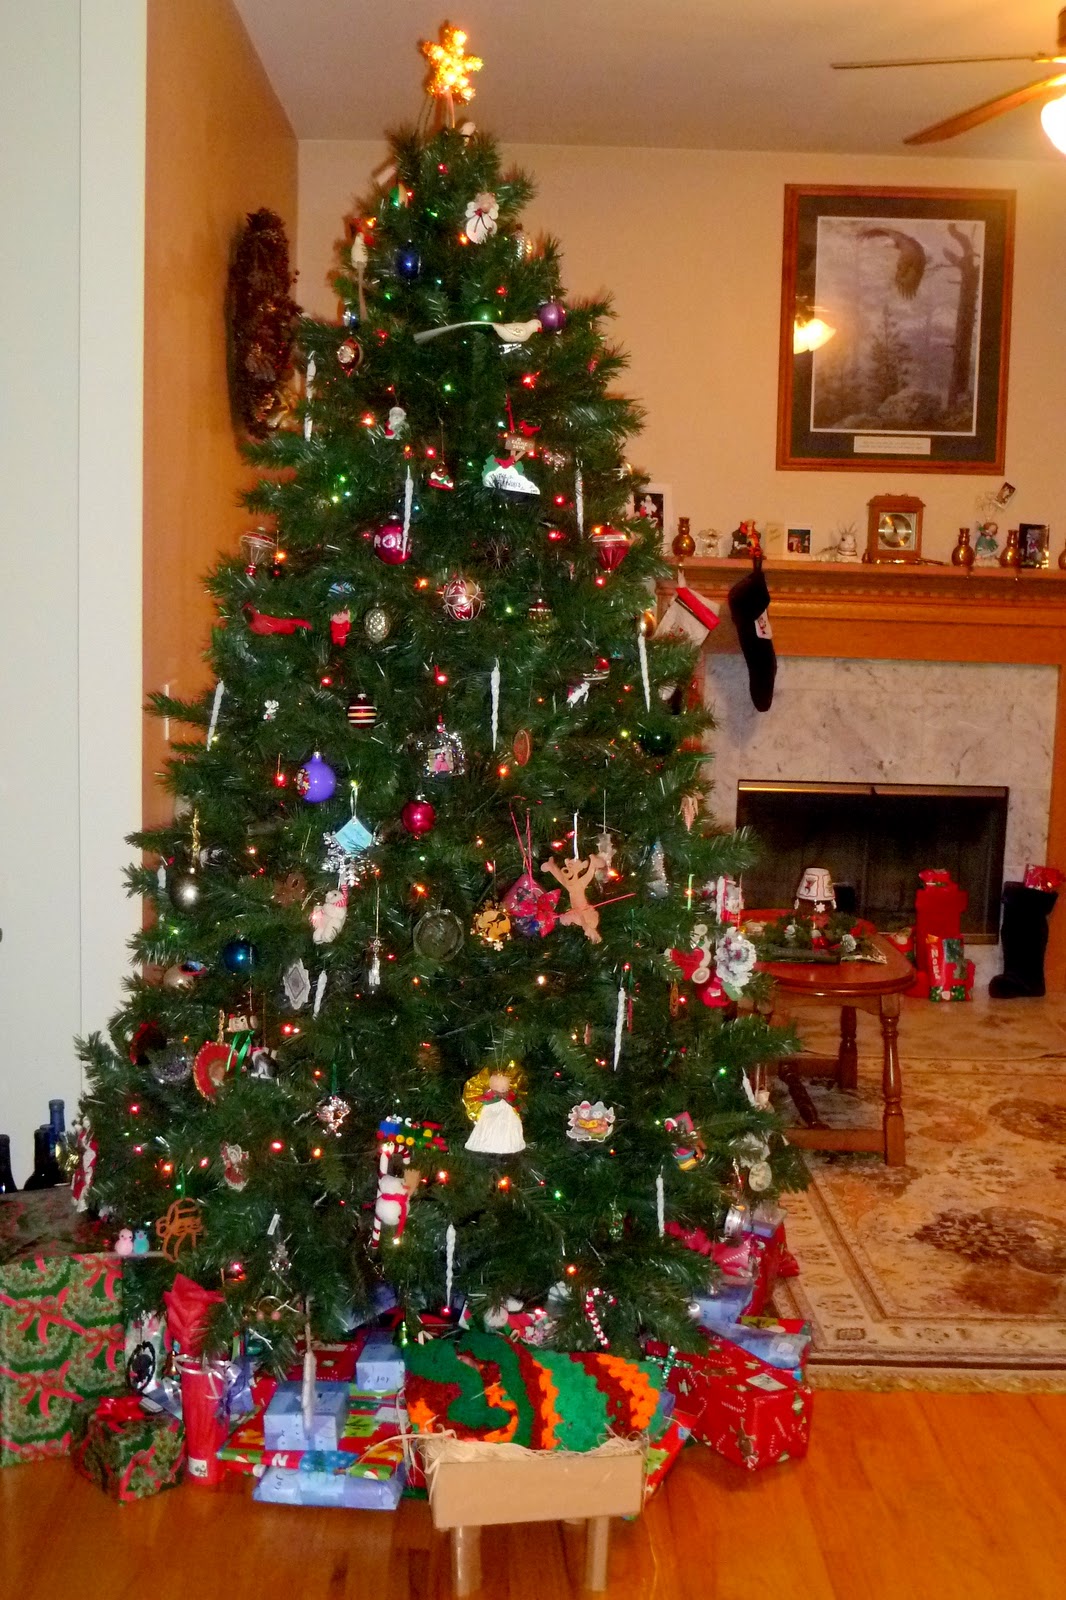 Pictures Of Christmas Trees With Presents Under It